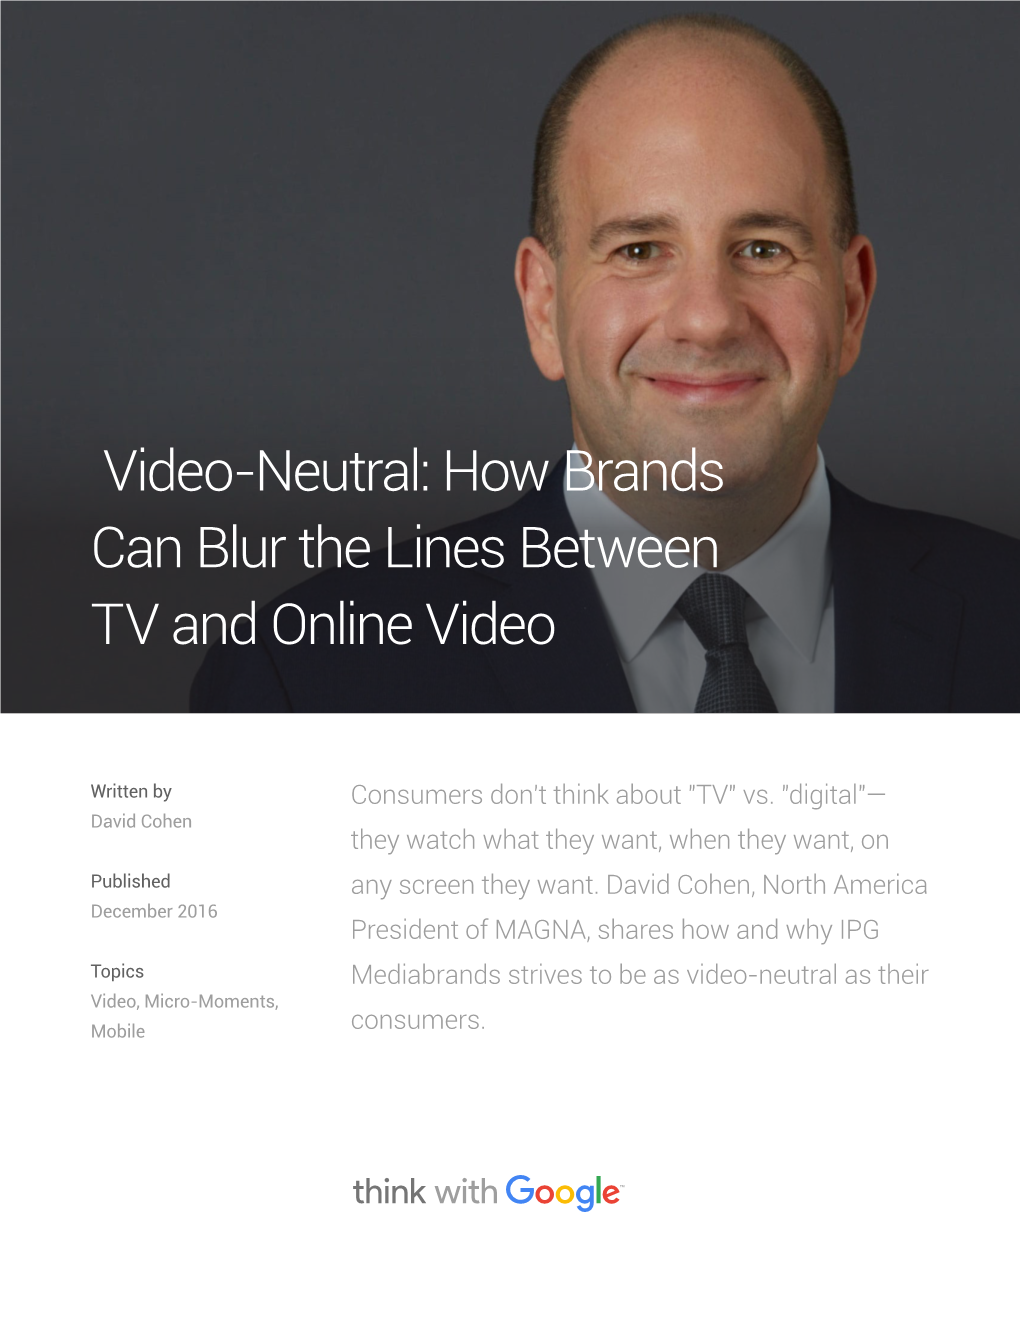 Video-Neutral: How Brands Can Blur the Lines Between TV and Online Video